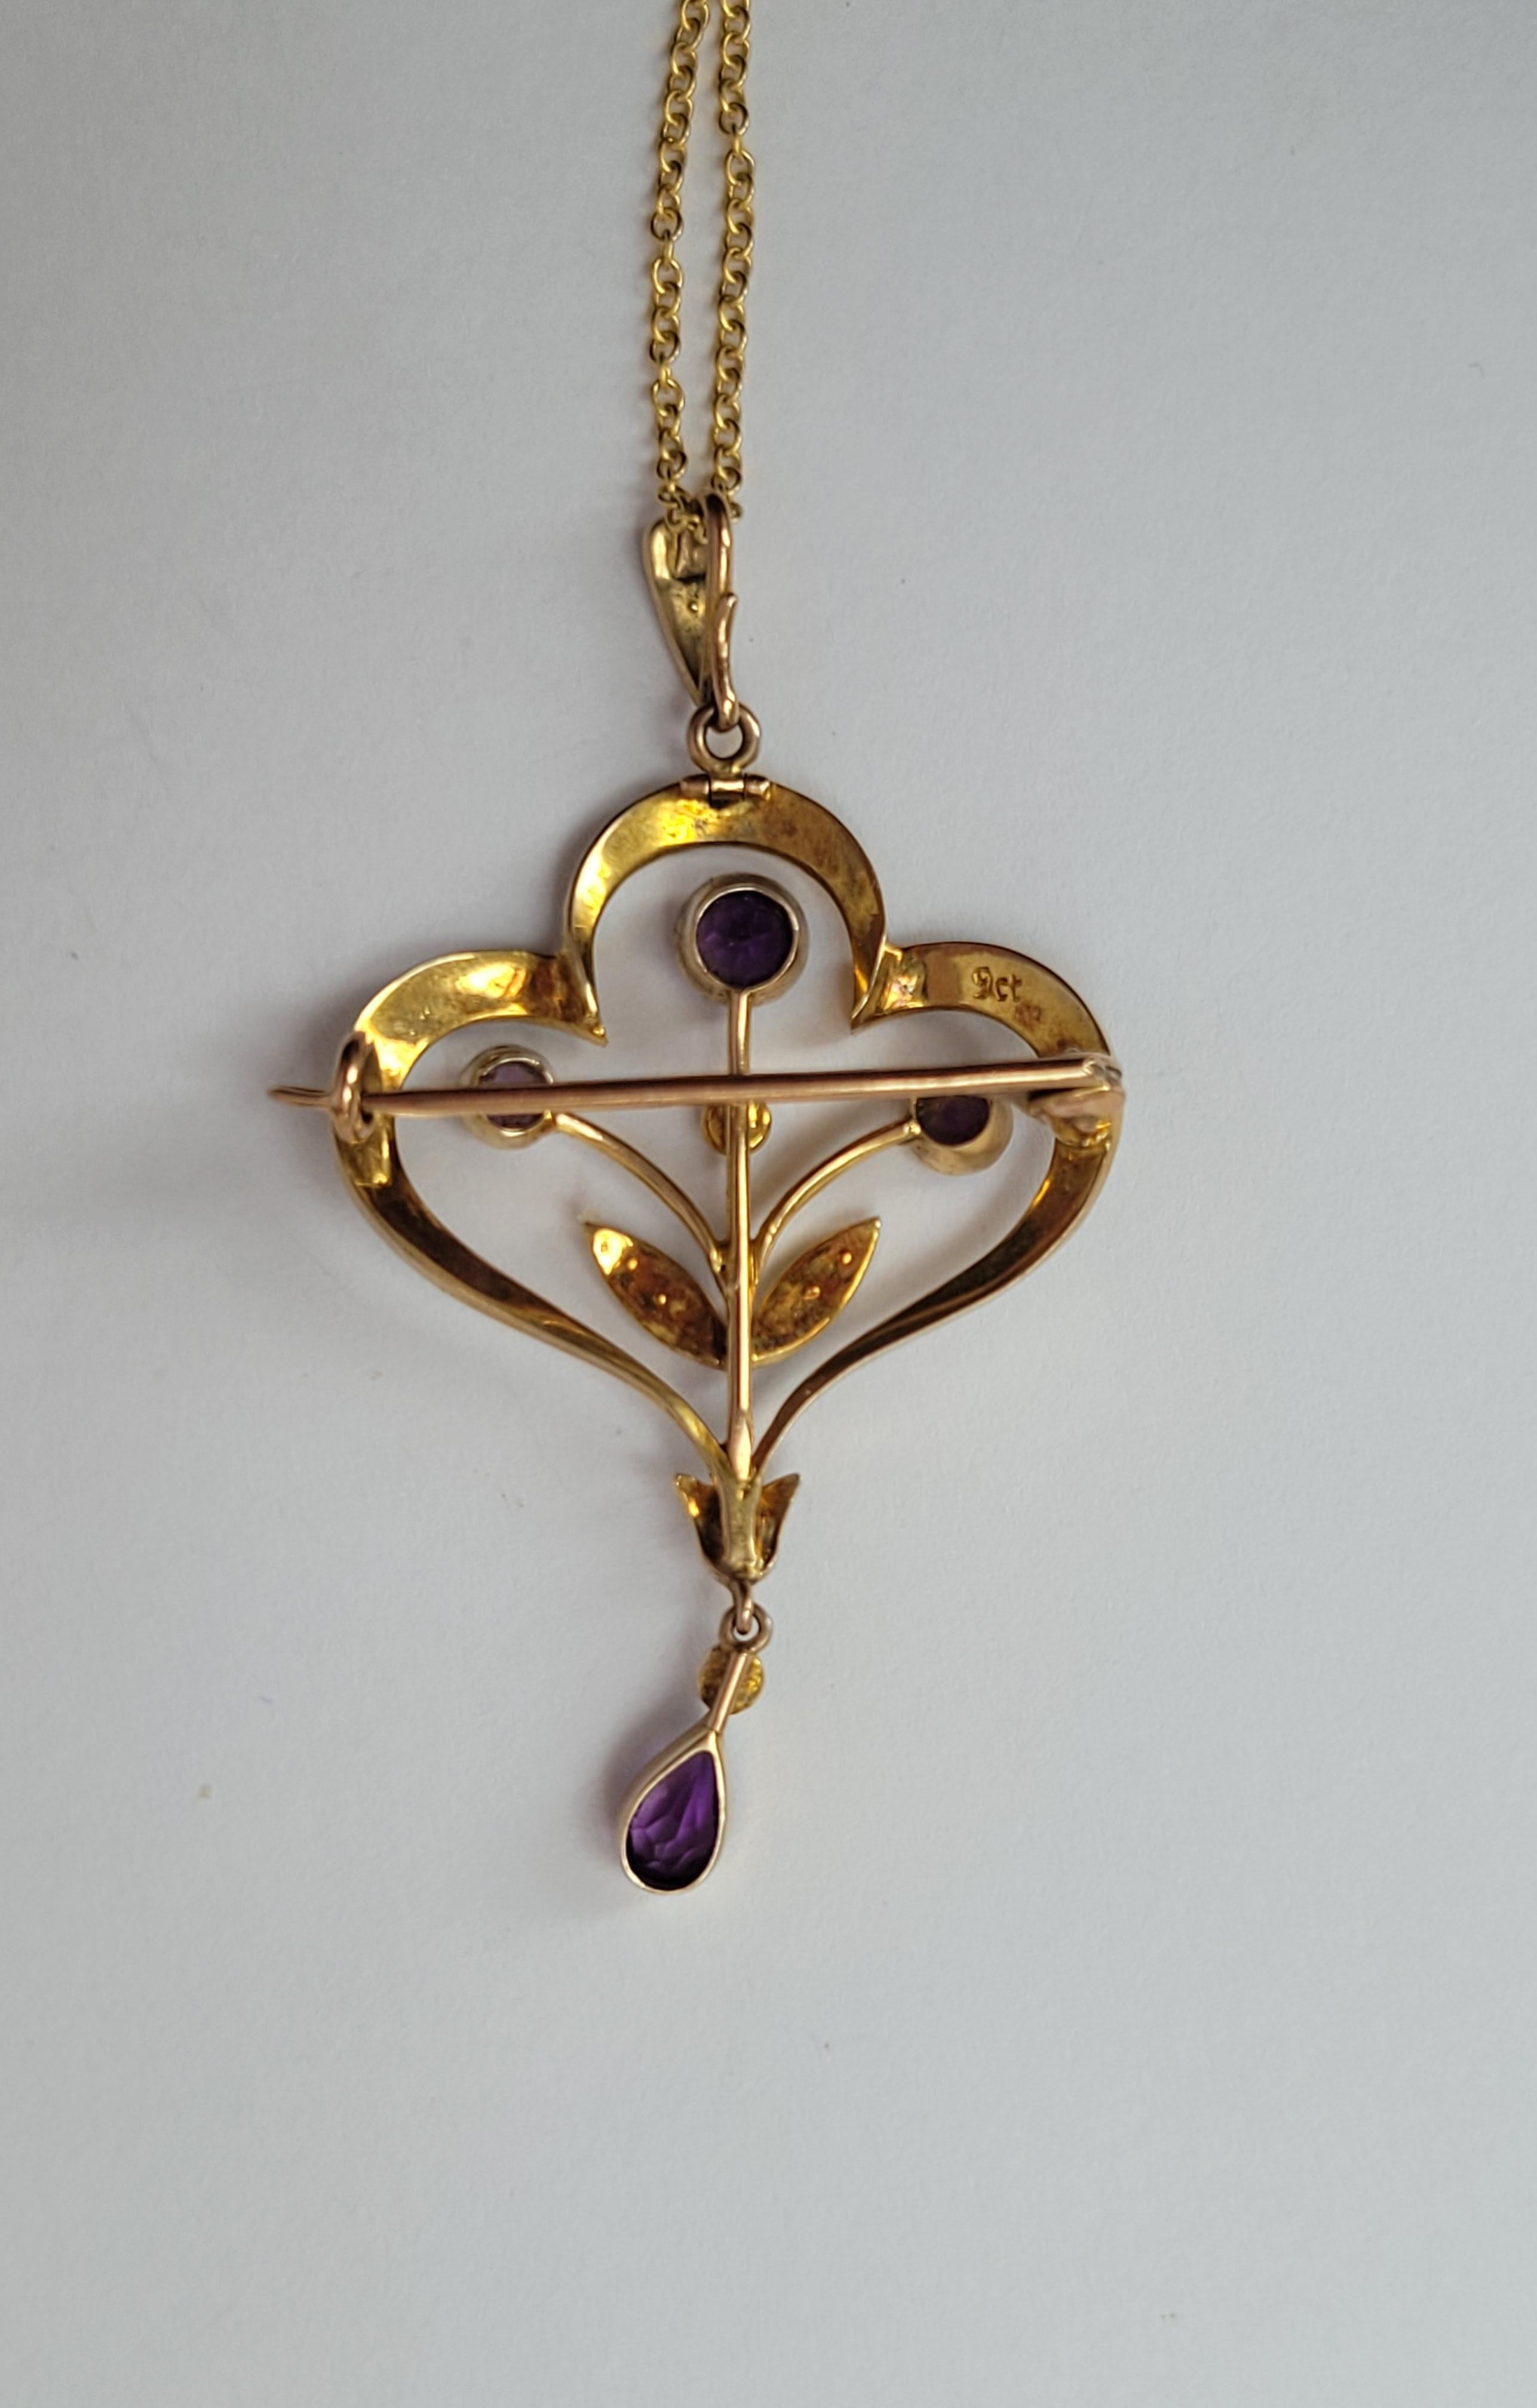 Antique Edwardian Amethyst Pearl Gold Brooch Pendant Necklace For Sale 3